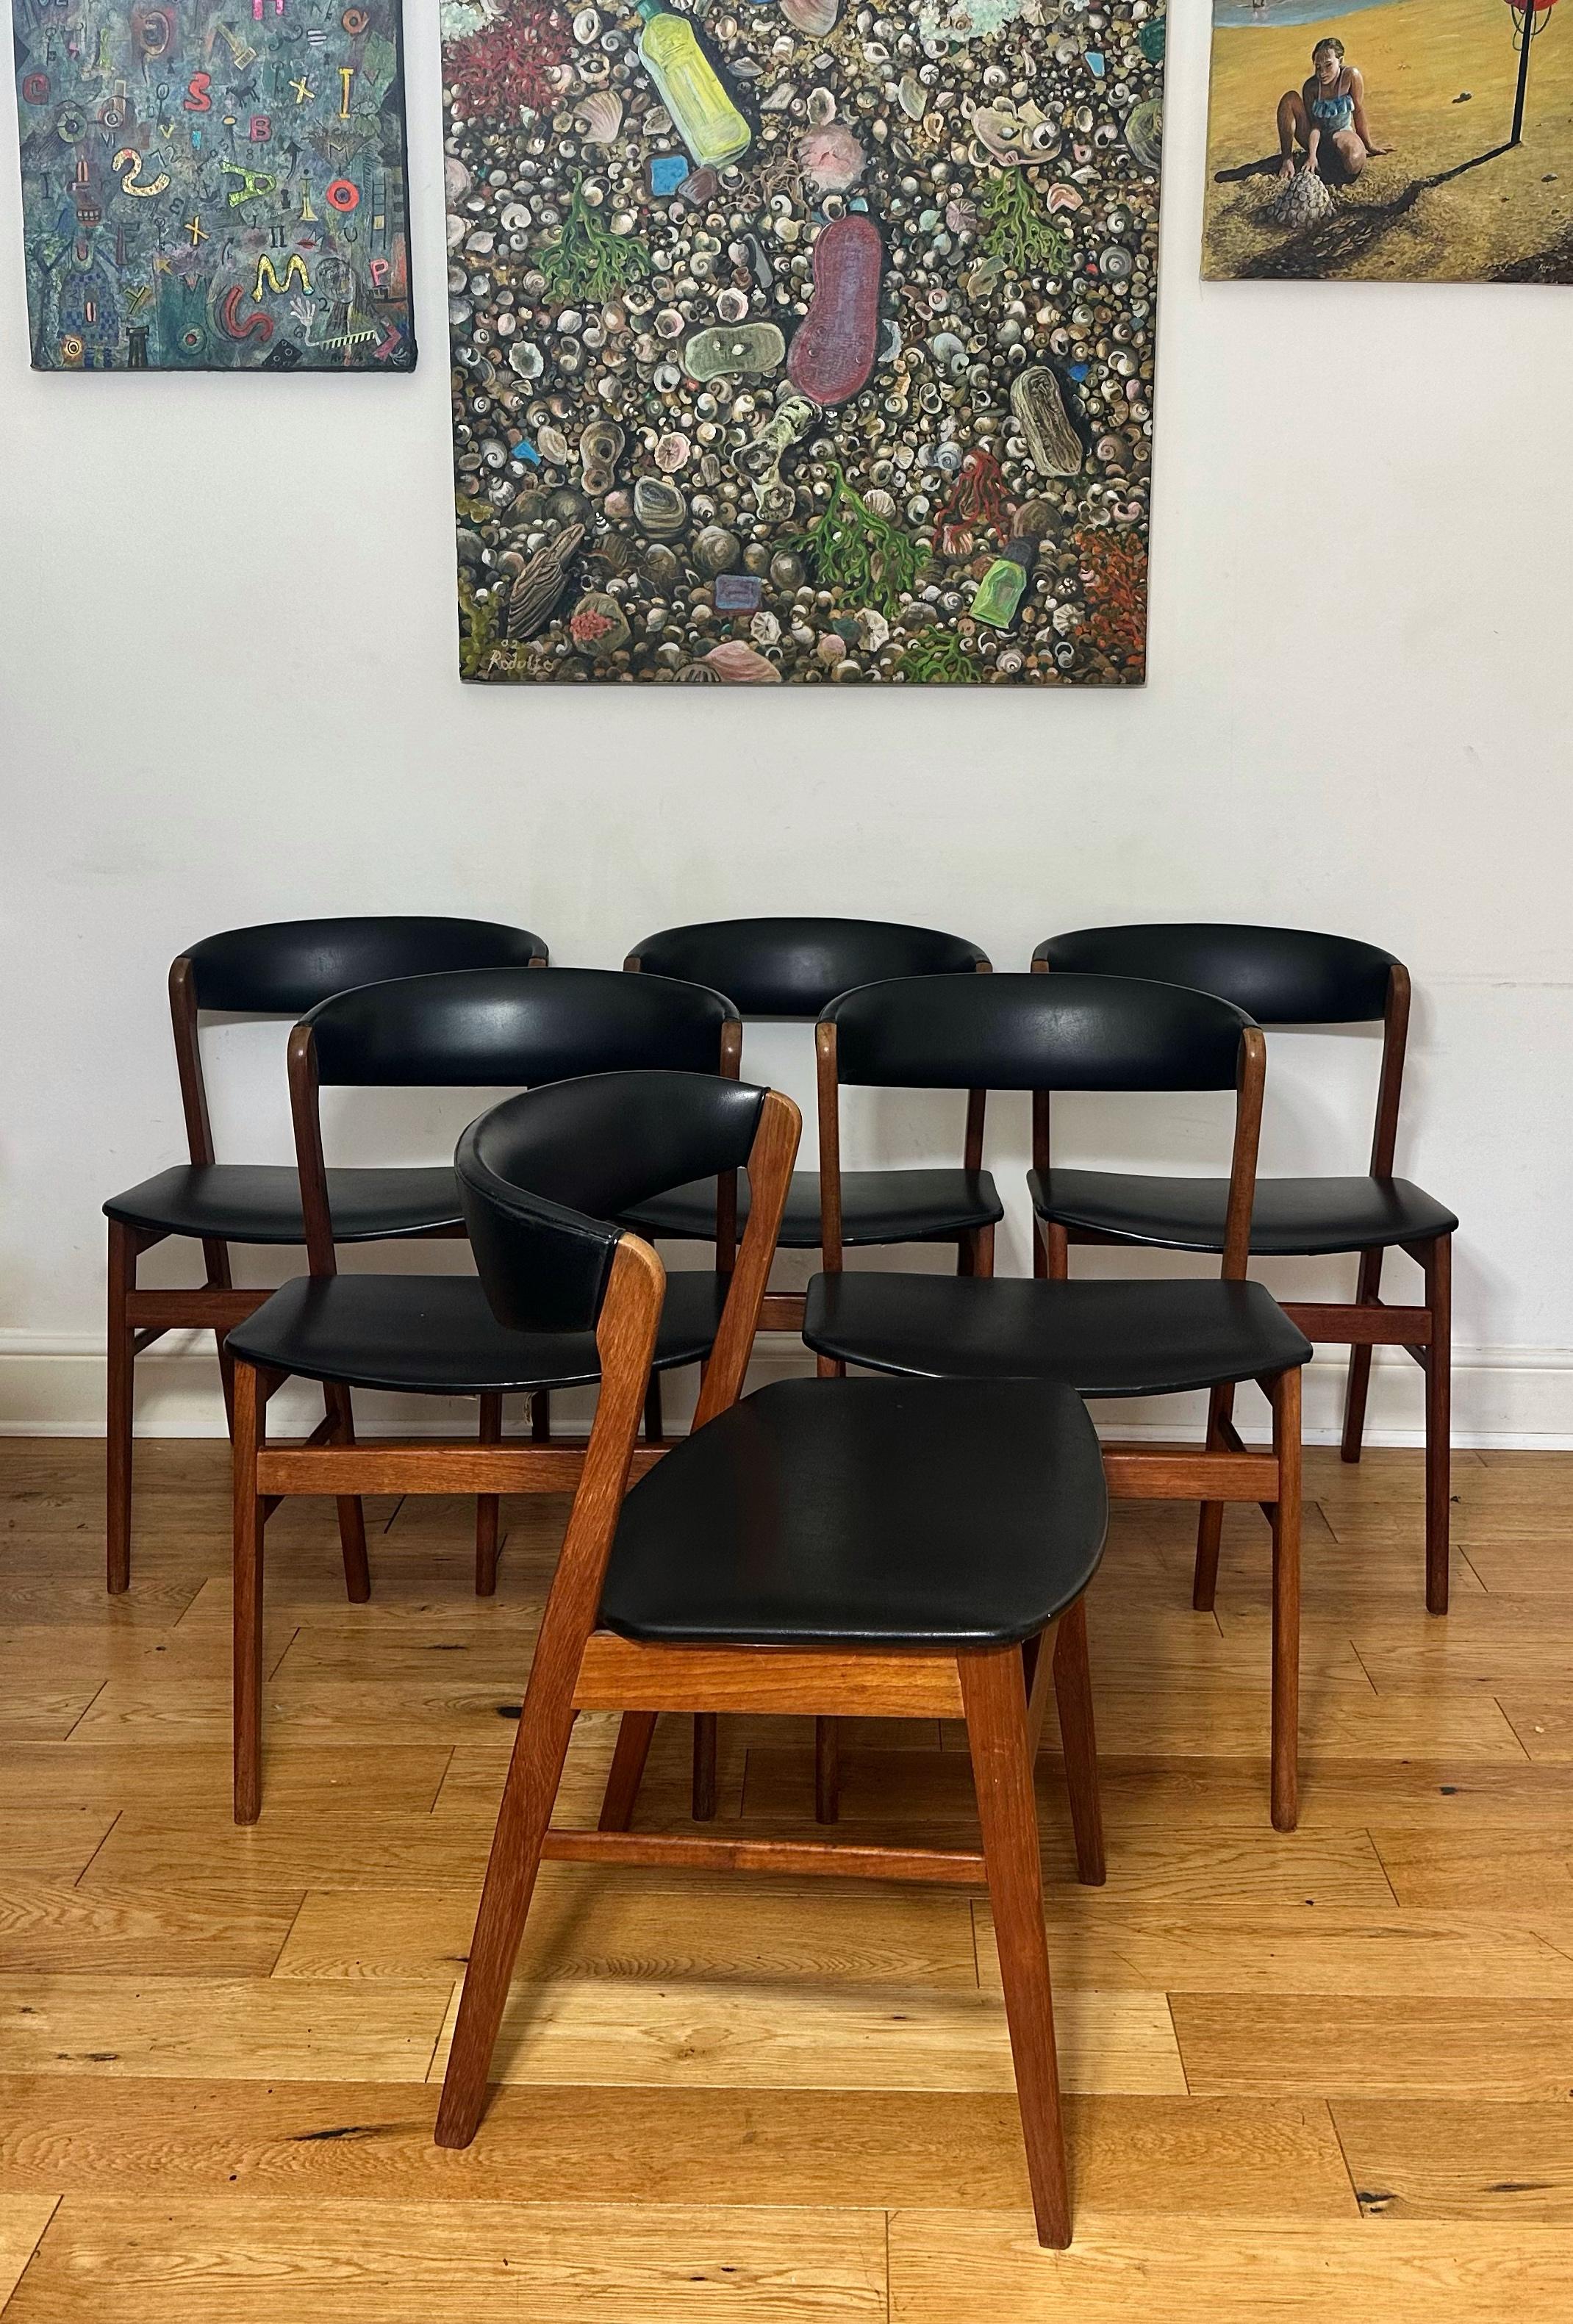 We’re happy to provide our own competitive shipping quotes with trusted couriers. Please message us with your postcode for a more accurate price. Thank you.

Stunning Mid-century modern Danish set of six dining chairs by Sax. Solid teak frame, very